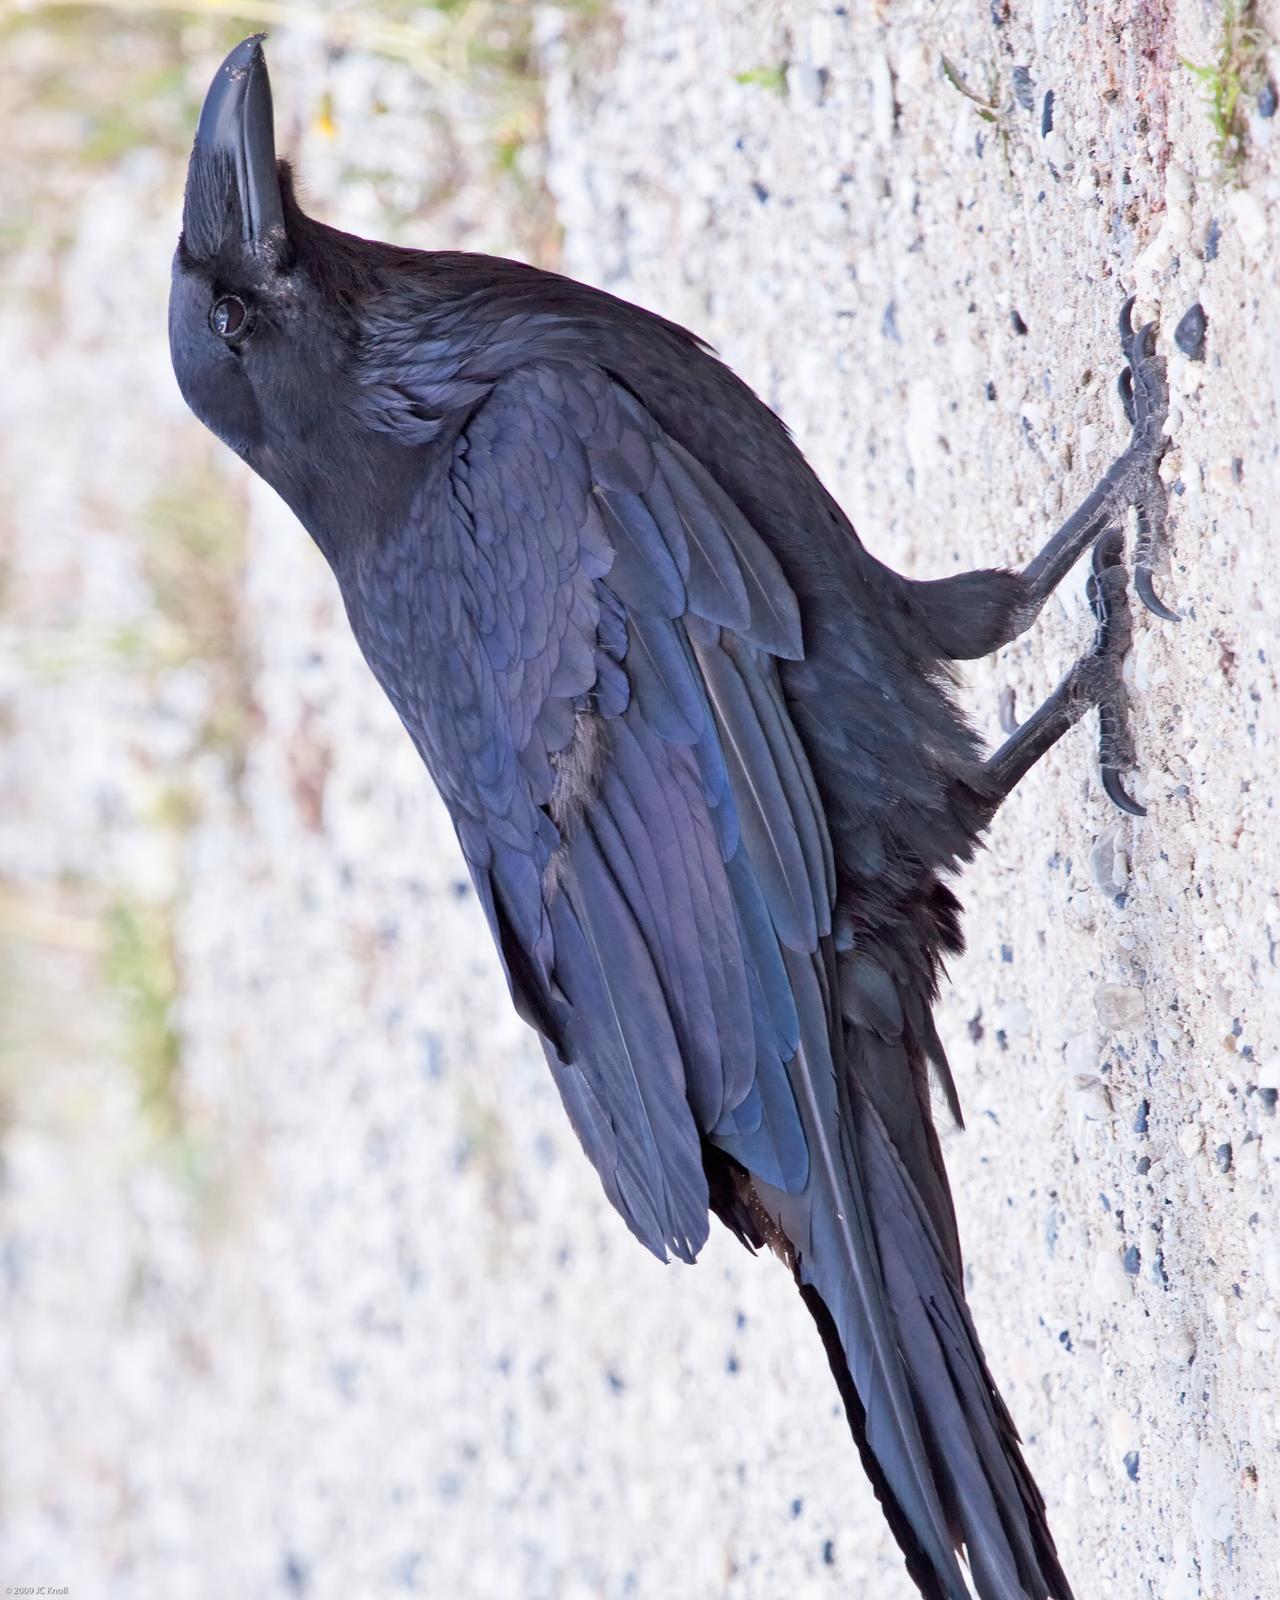 Common Raven Photo by JC Knoll